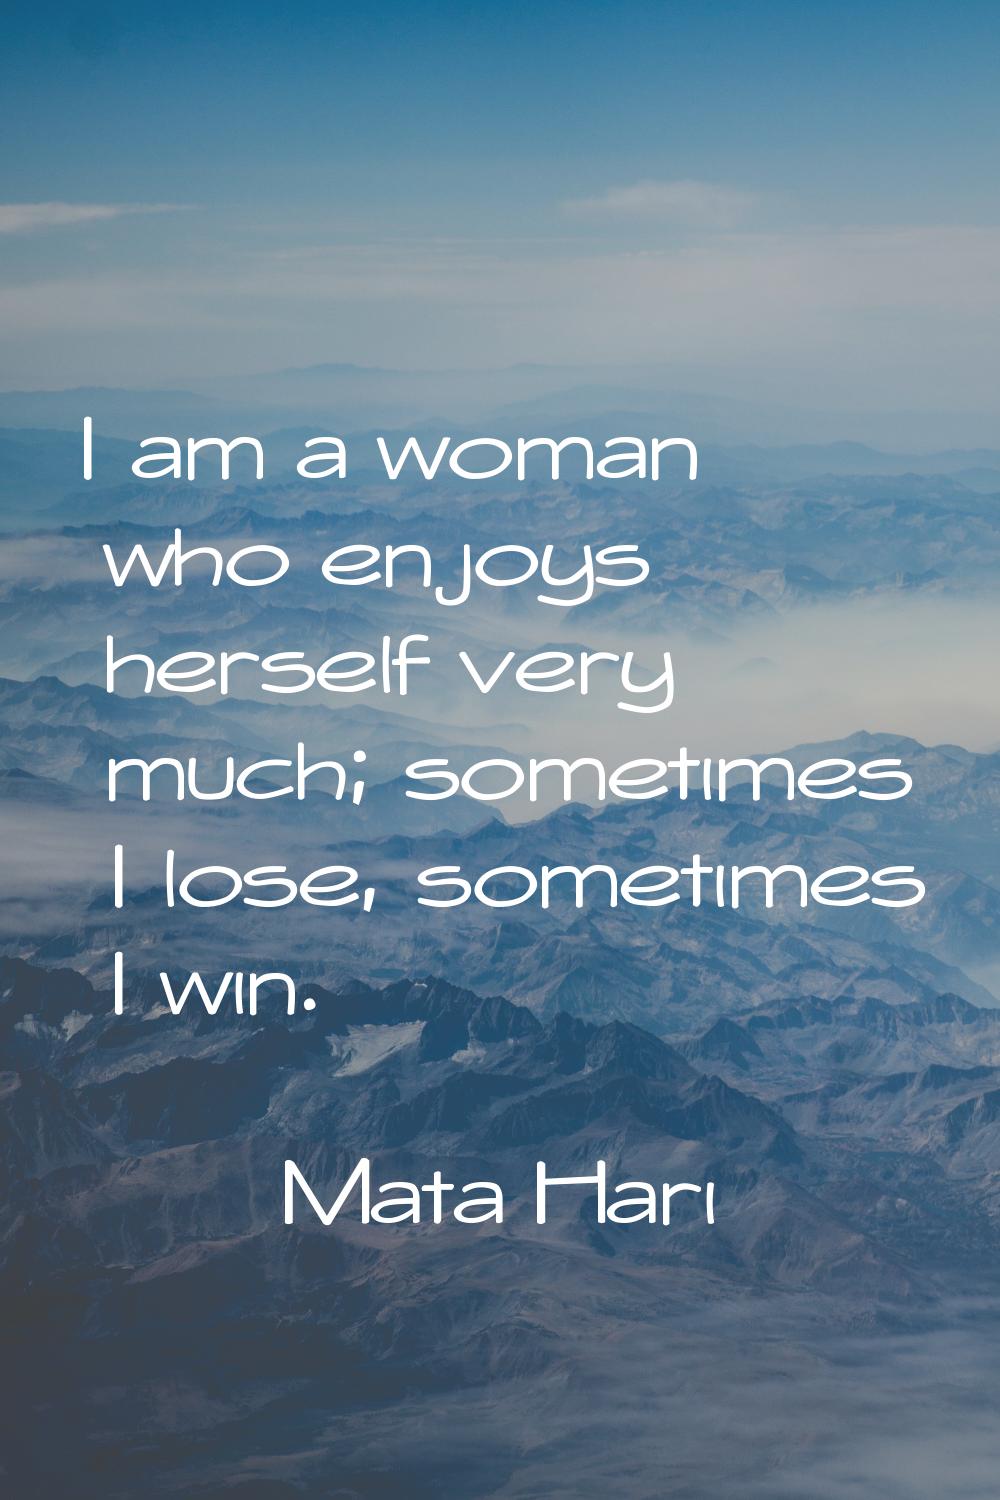 I am a woman who enjoys herself very much; sometimes I lose, sometimes I win.